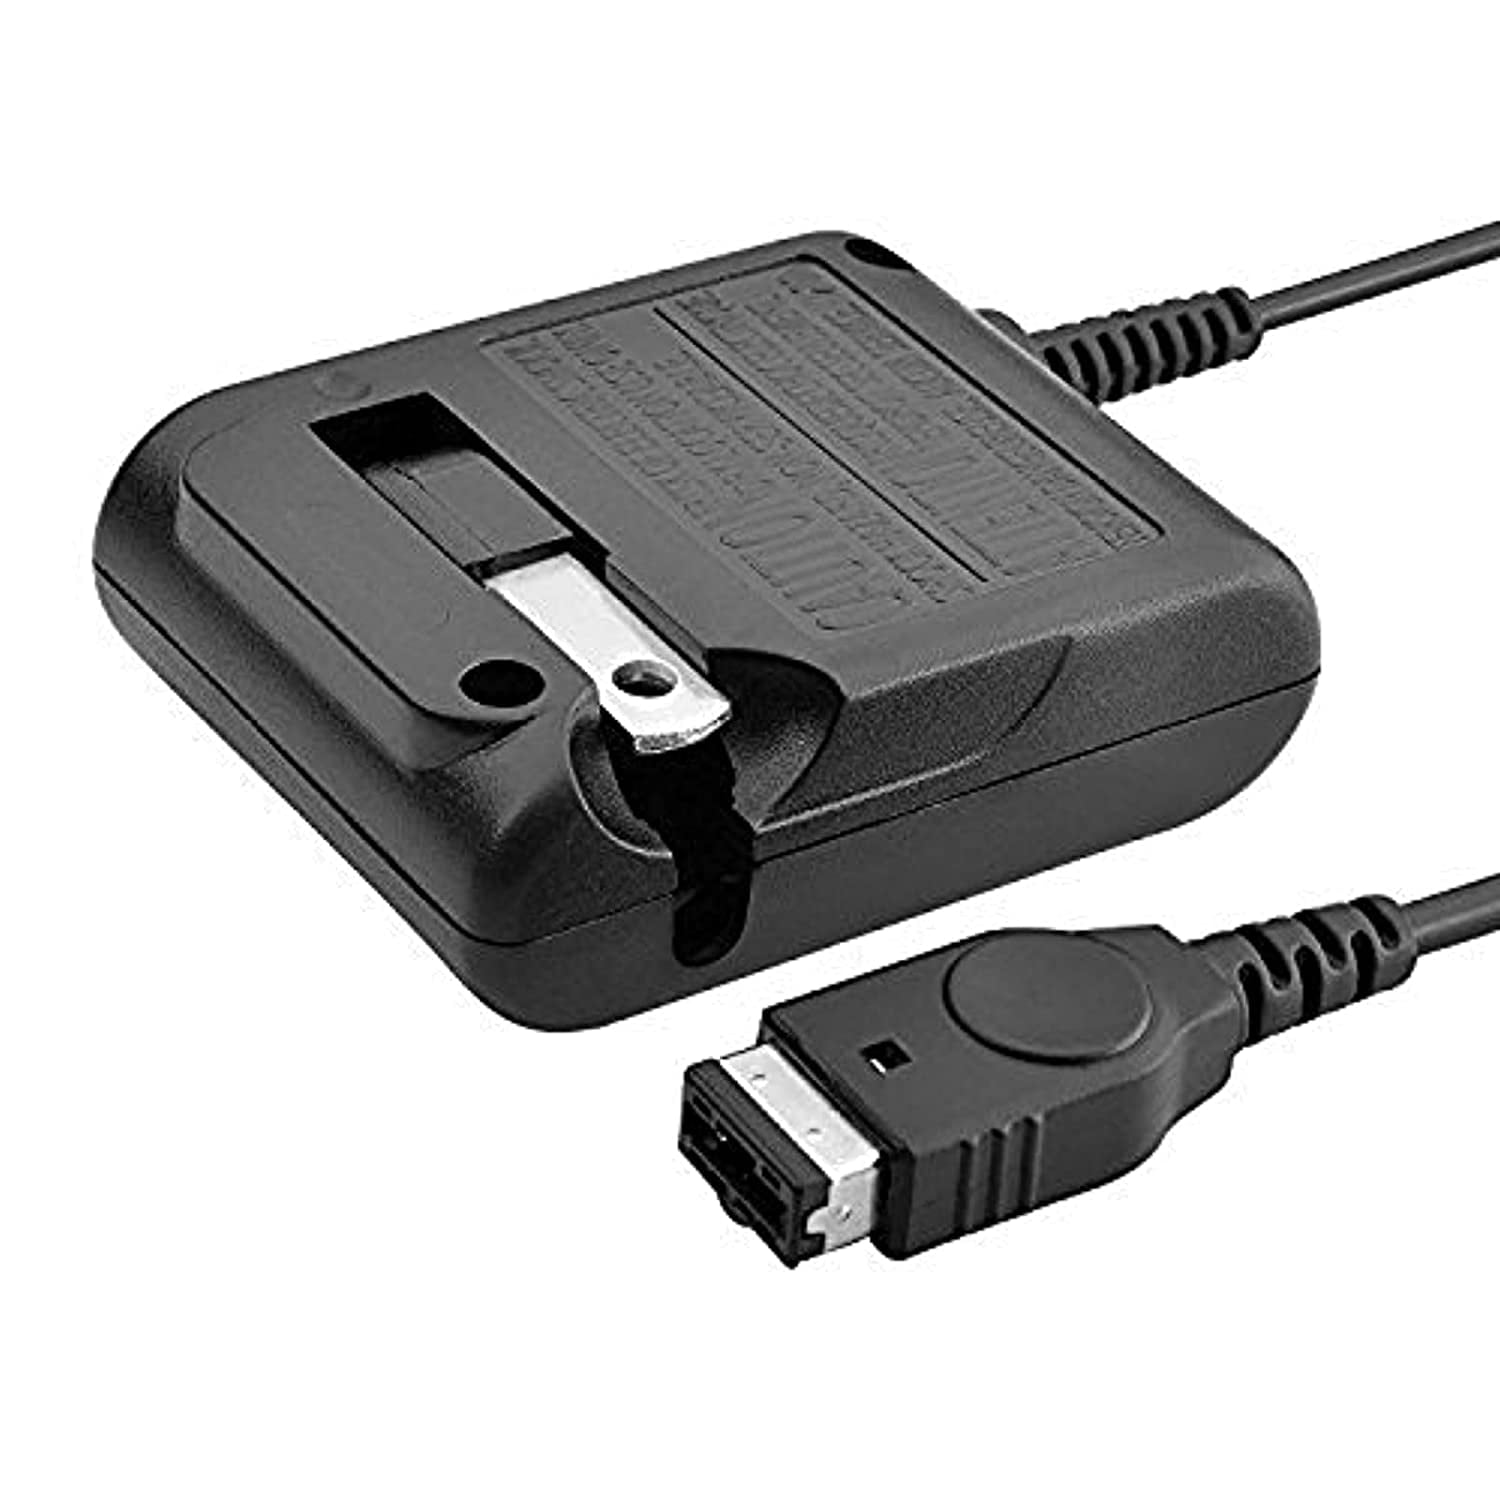 Gameboy Advance SP Charger, Home Wall Charger for Switch Gameboy Advance  Gameboy Advance SP Game Console, Portable Mini AC Adapter Travel Charger  Fit